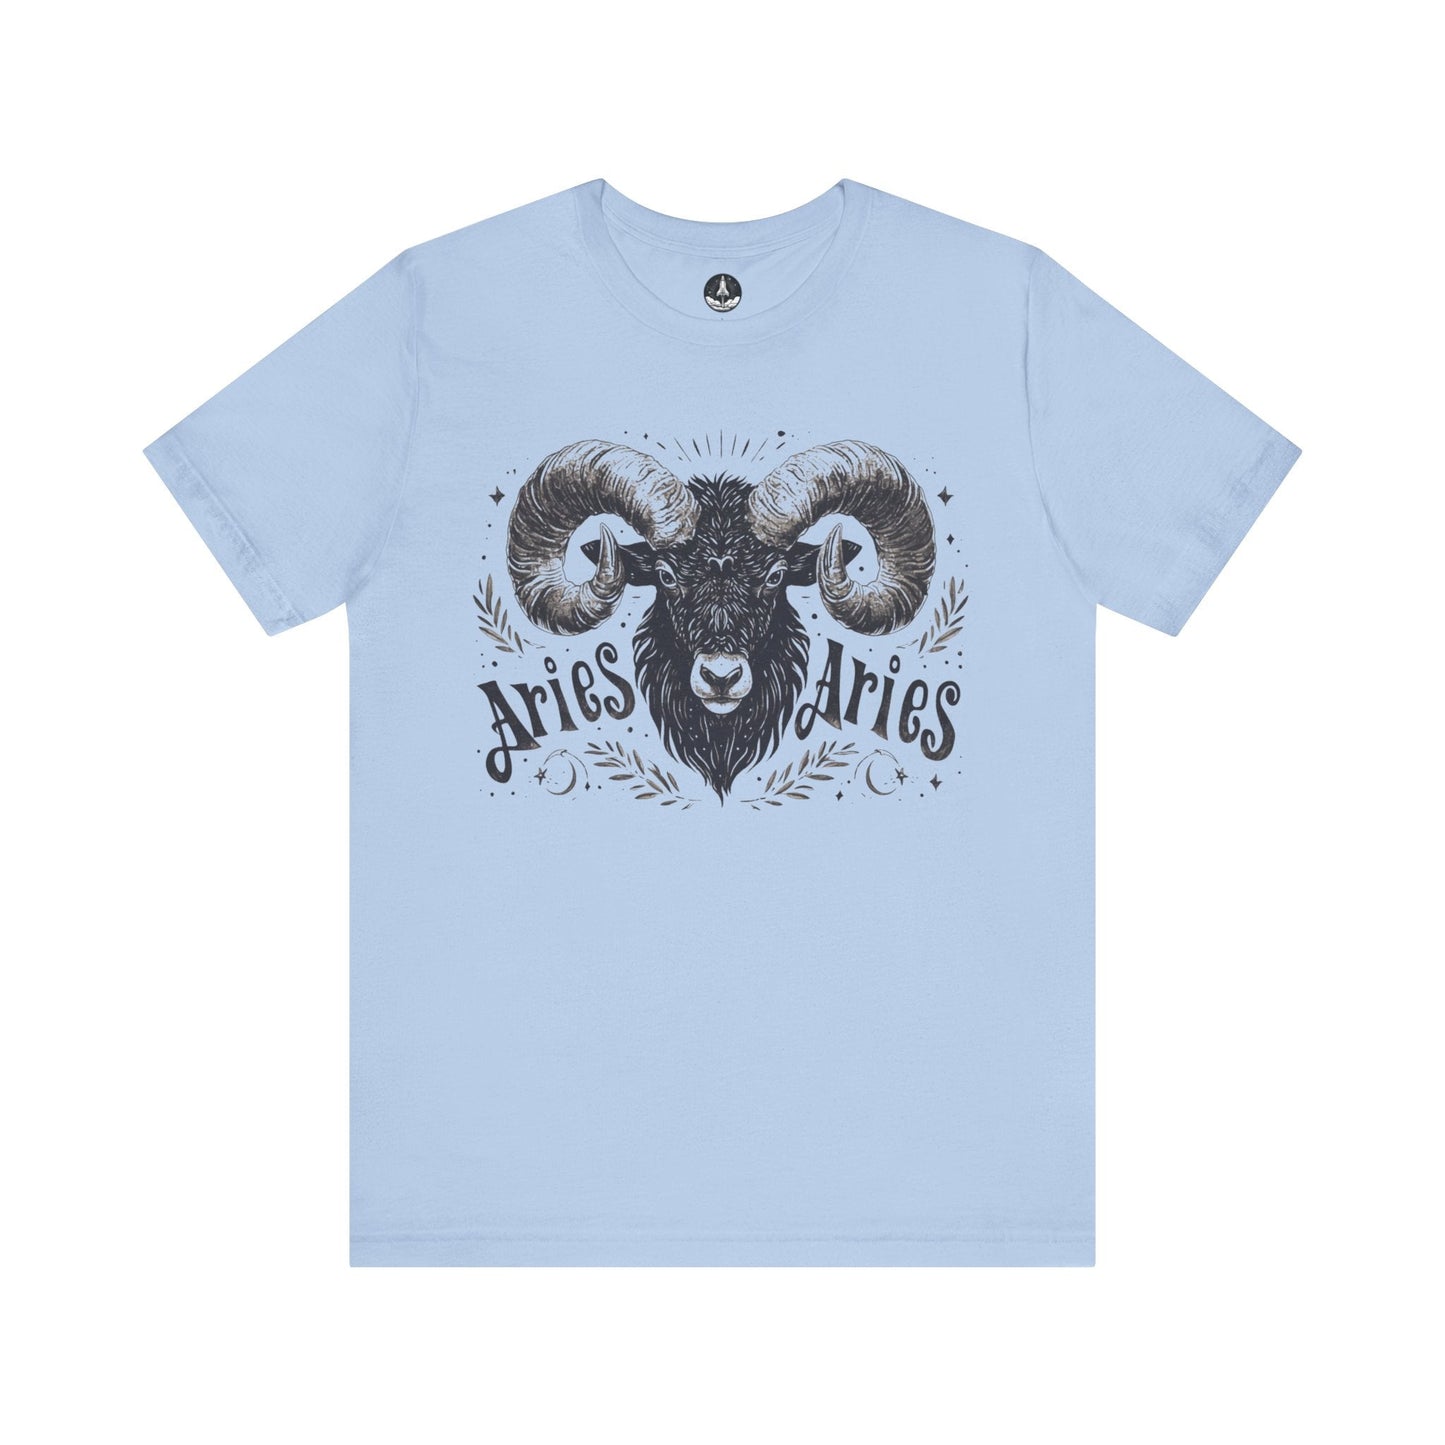 T-Shirt Baby Blue / S Aries Astrology Unisex TShirt: An Ode to the Maverick